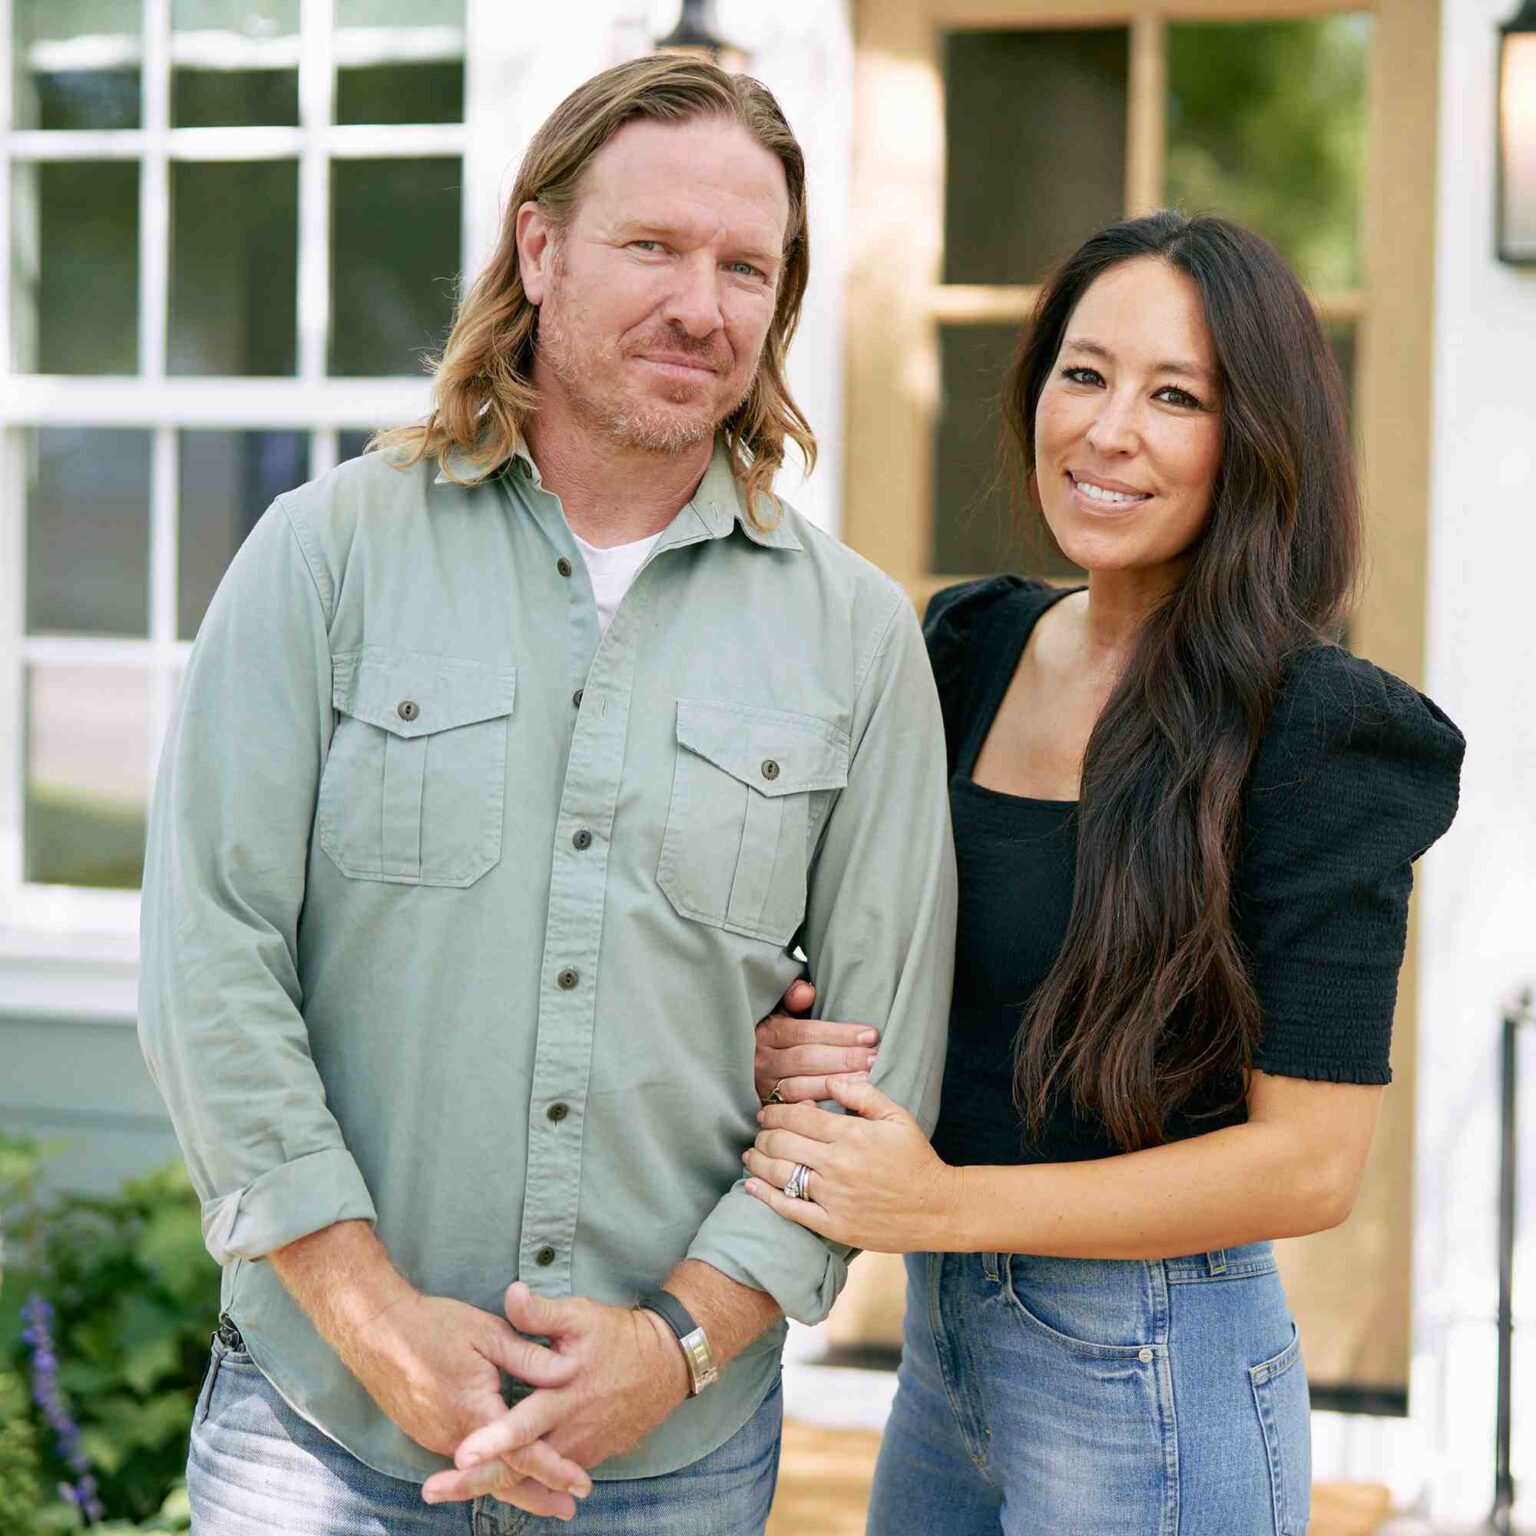 From rustic charm to courtroom drama - explore how ongoing feuds might be shaking the foundation of Chip Gaines's net worth. An intriguing clash of DIY and dollars.